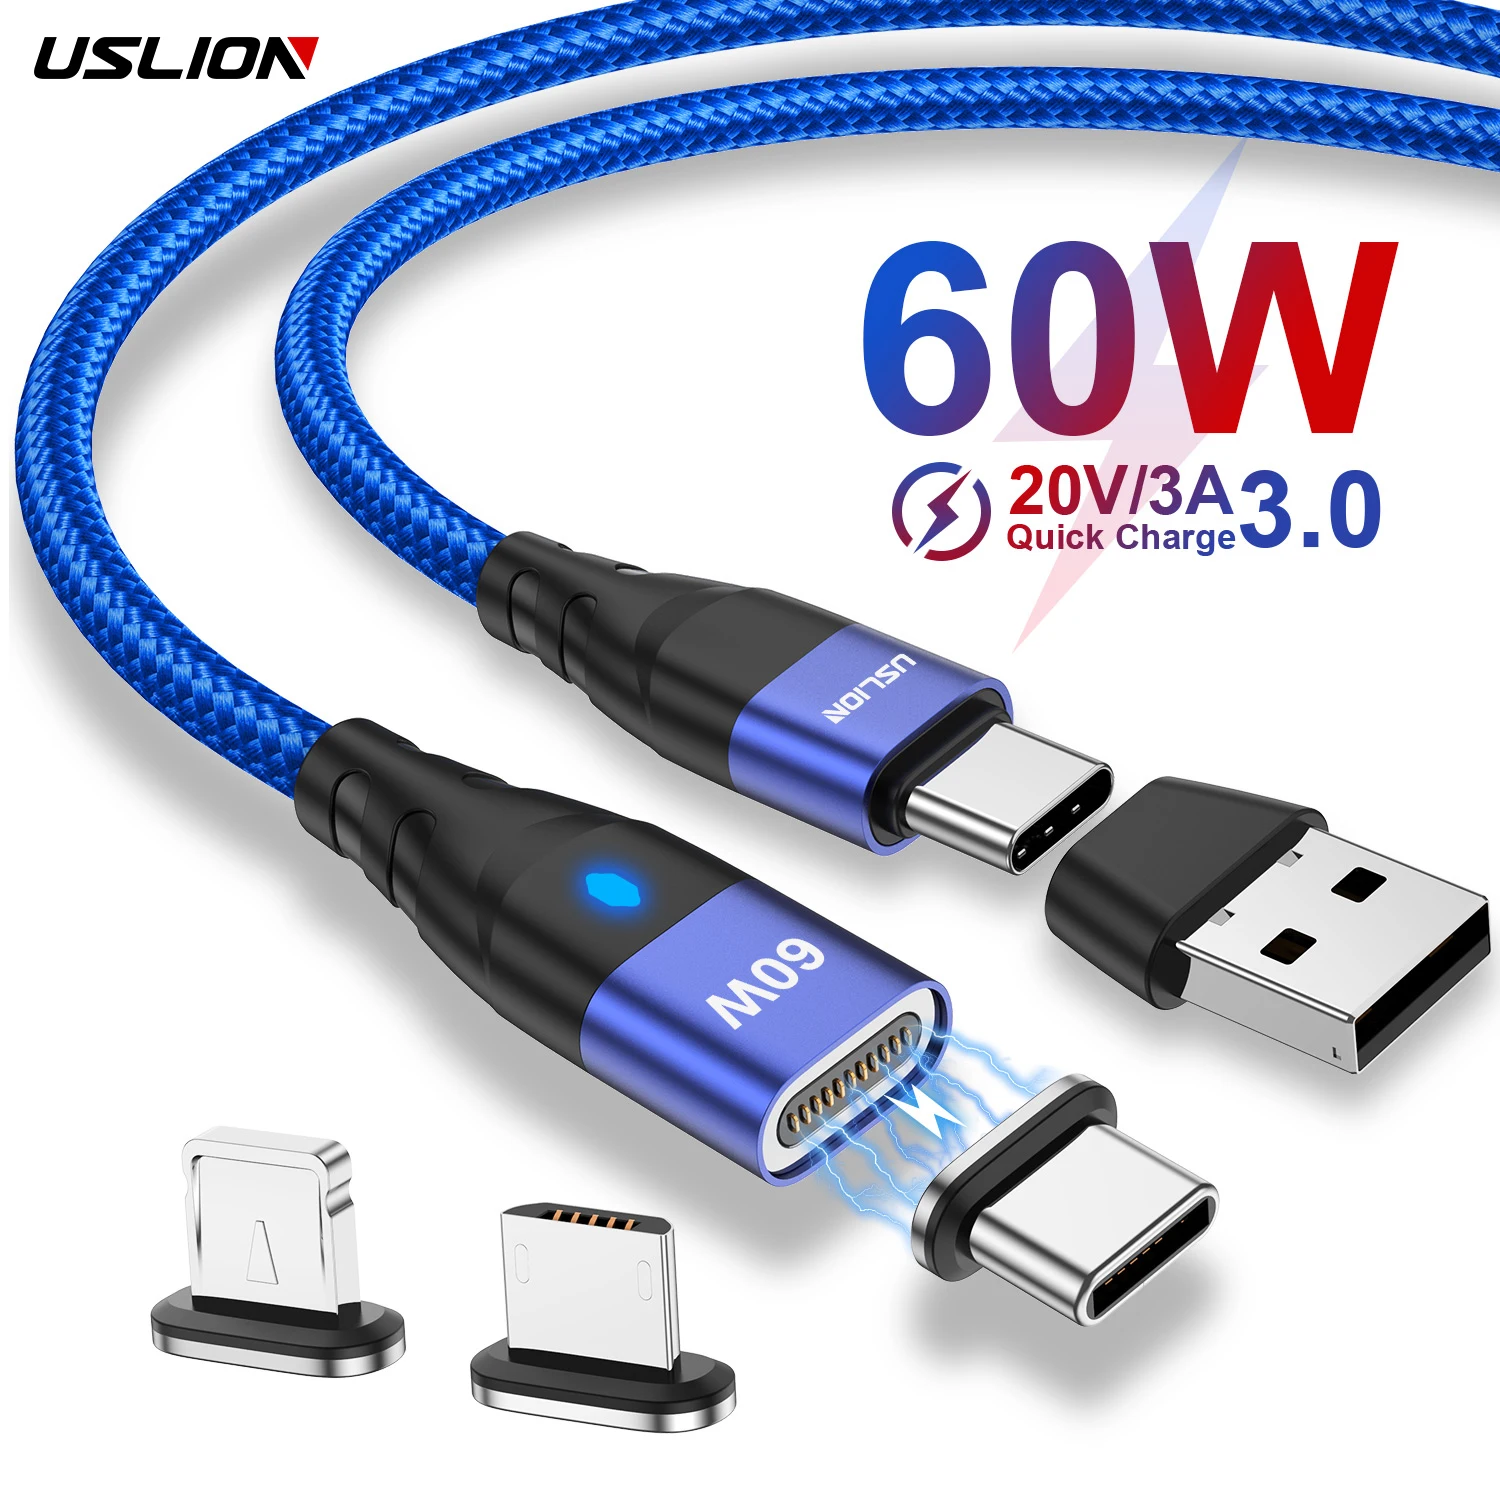 

USLION Drop Shipping 2M 6 IN 1 USB Type C PD 60W Magnetic Cable Charger Mobile Phone 3 IN 1 Micro USB Data Cables for iphone 13, Black blue purple red (oem color contact seller)